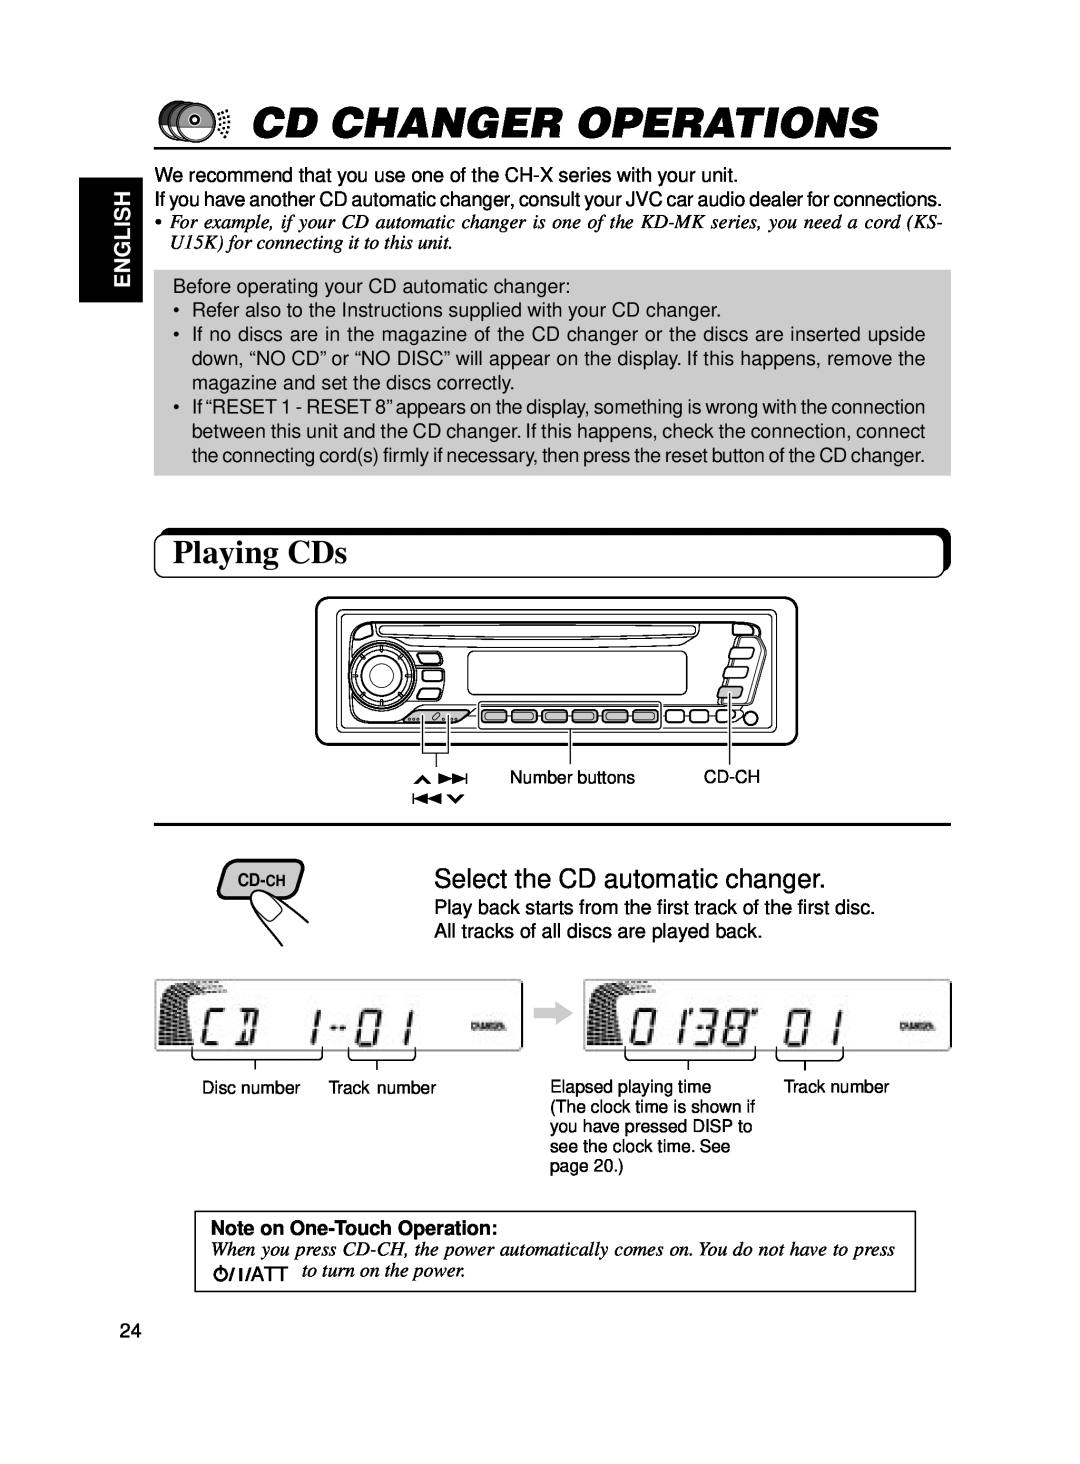 JVC KD-SX650 Cd Changer Operations, Playing CDs, Select the CD automatic changer, English, Note on One-TouchOperation 